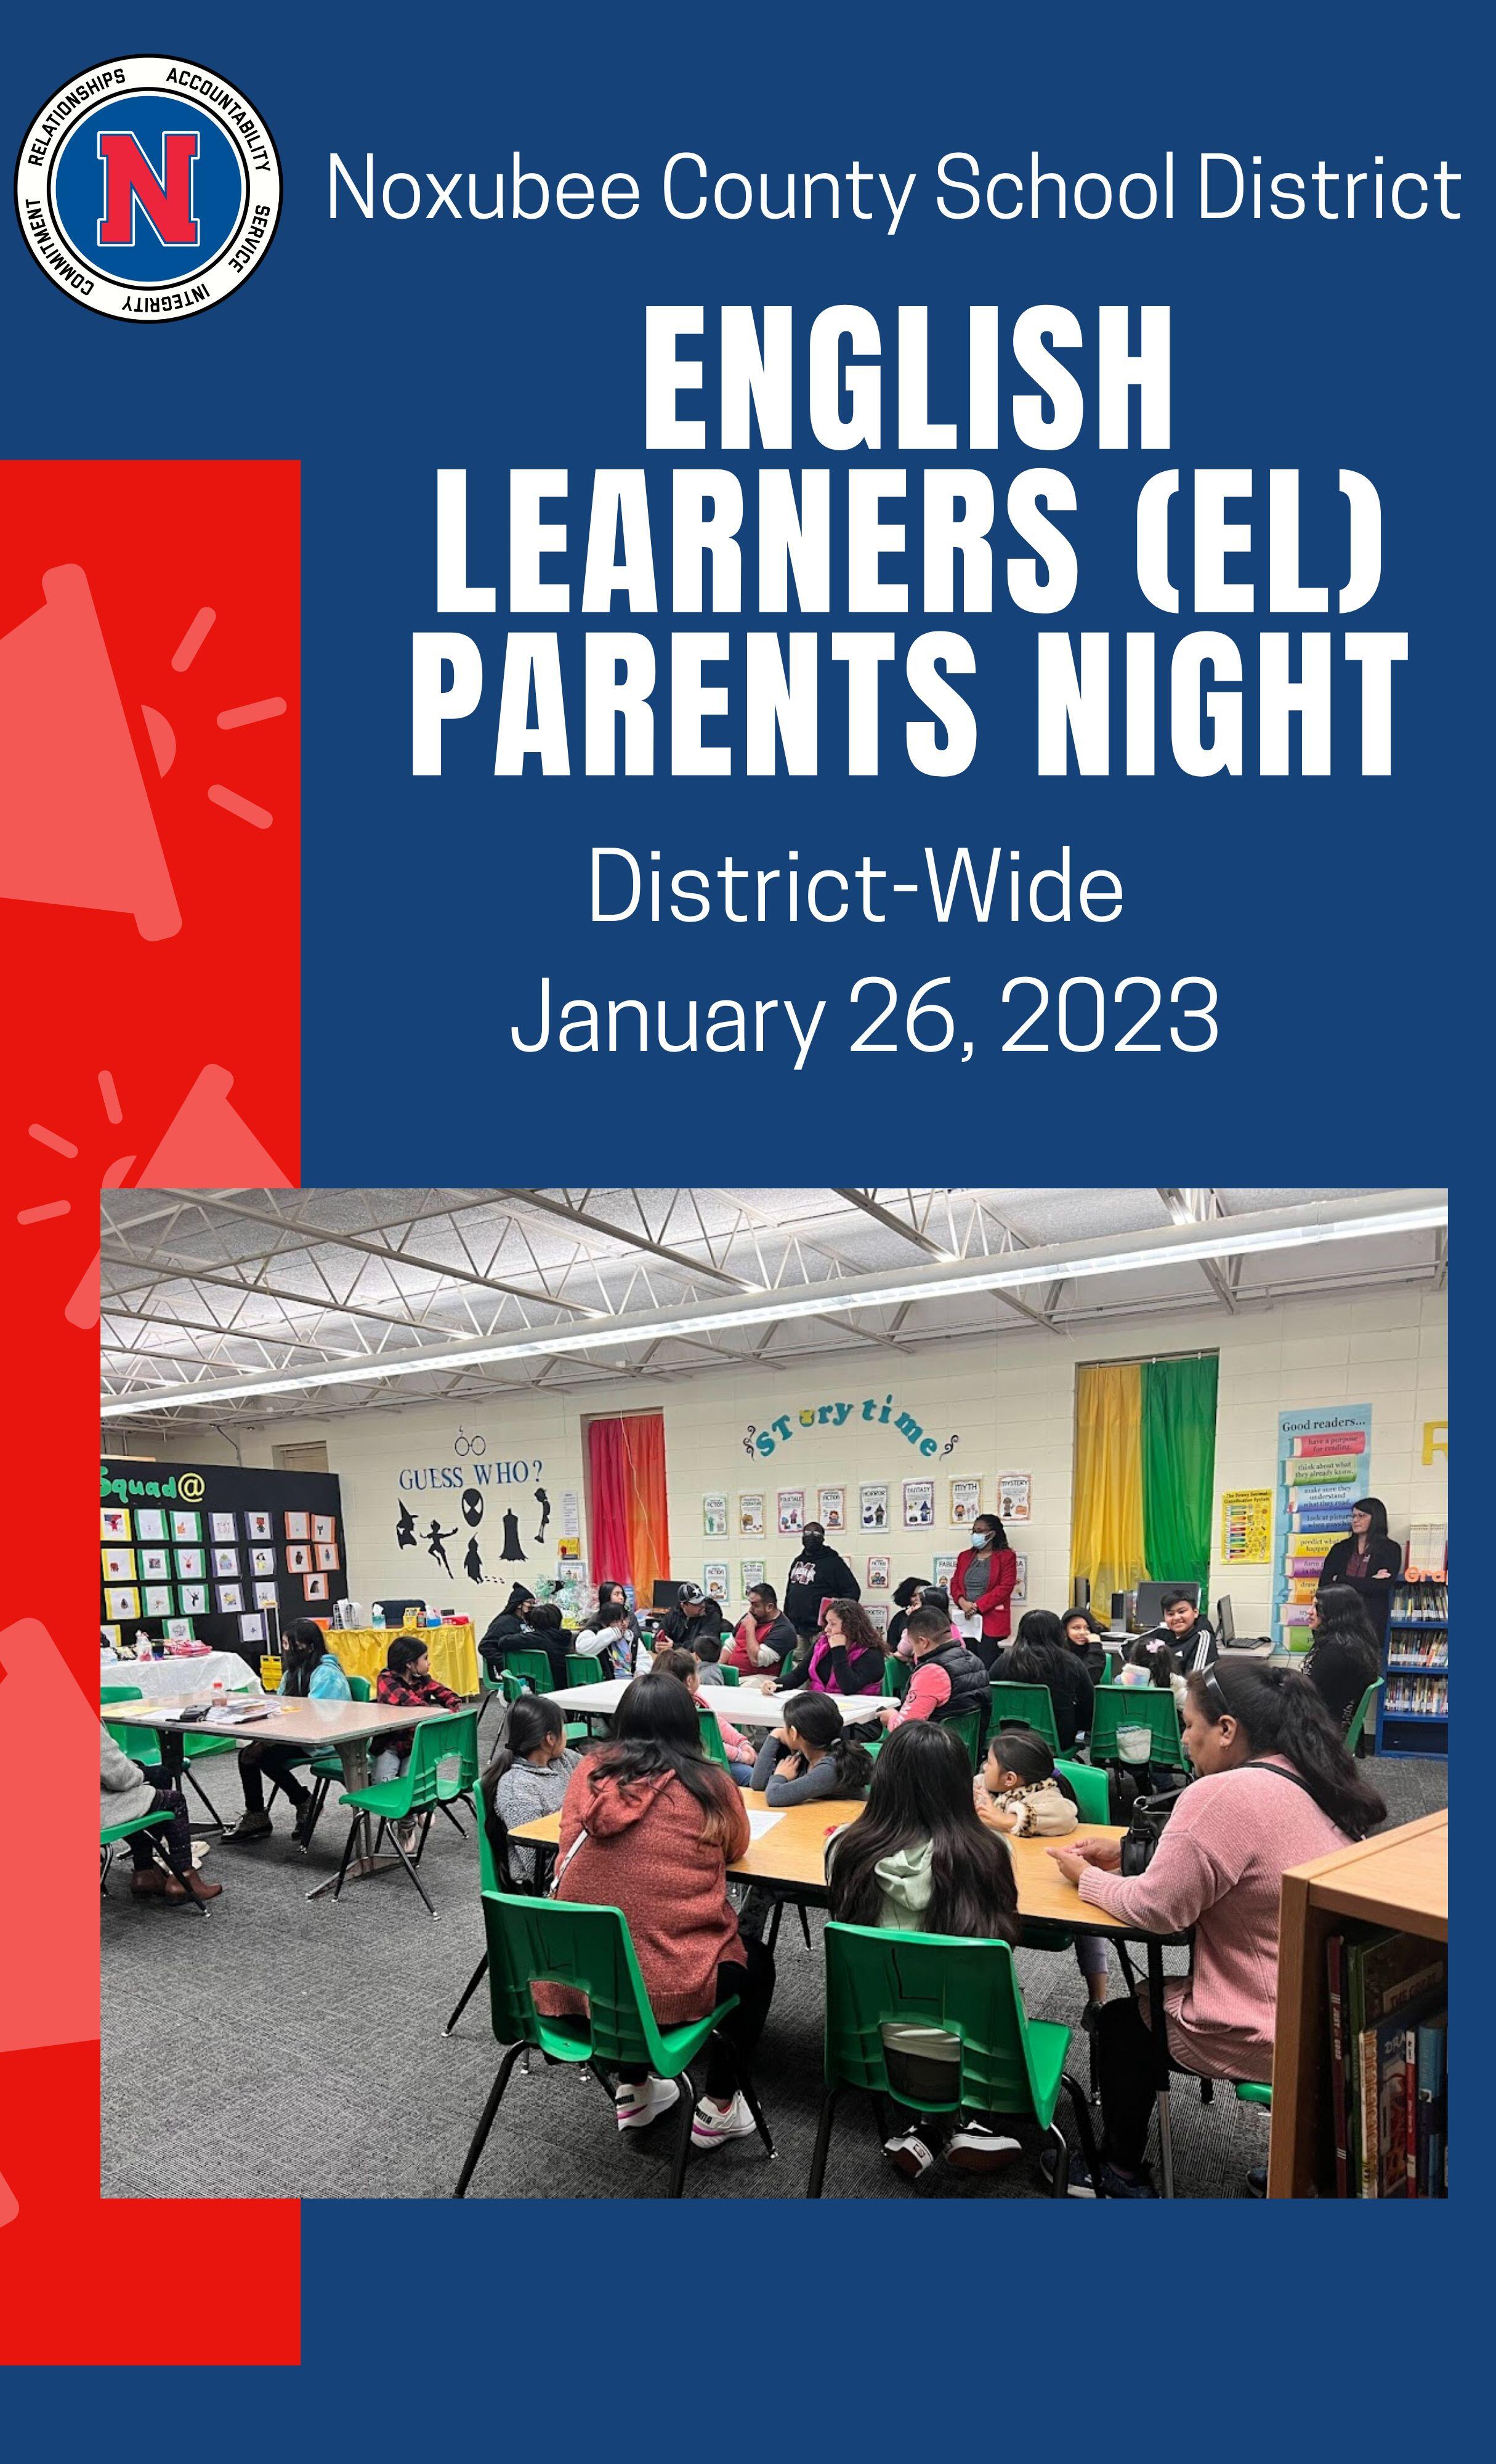 English Learners Parents Night